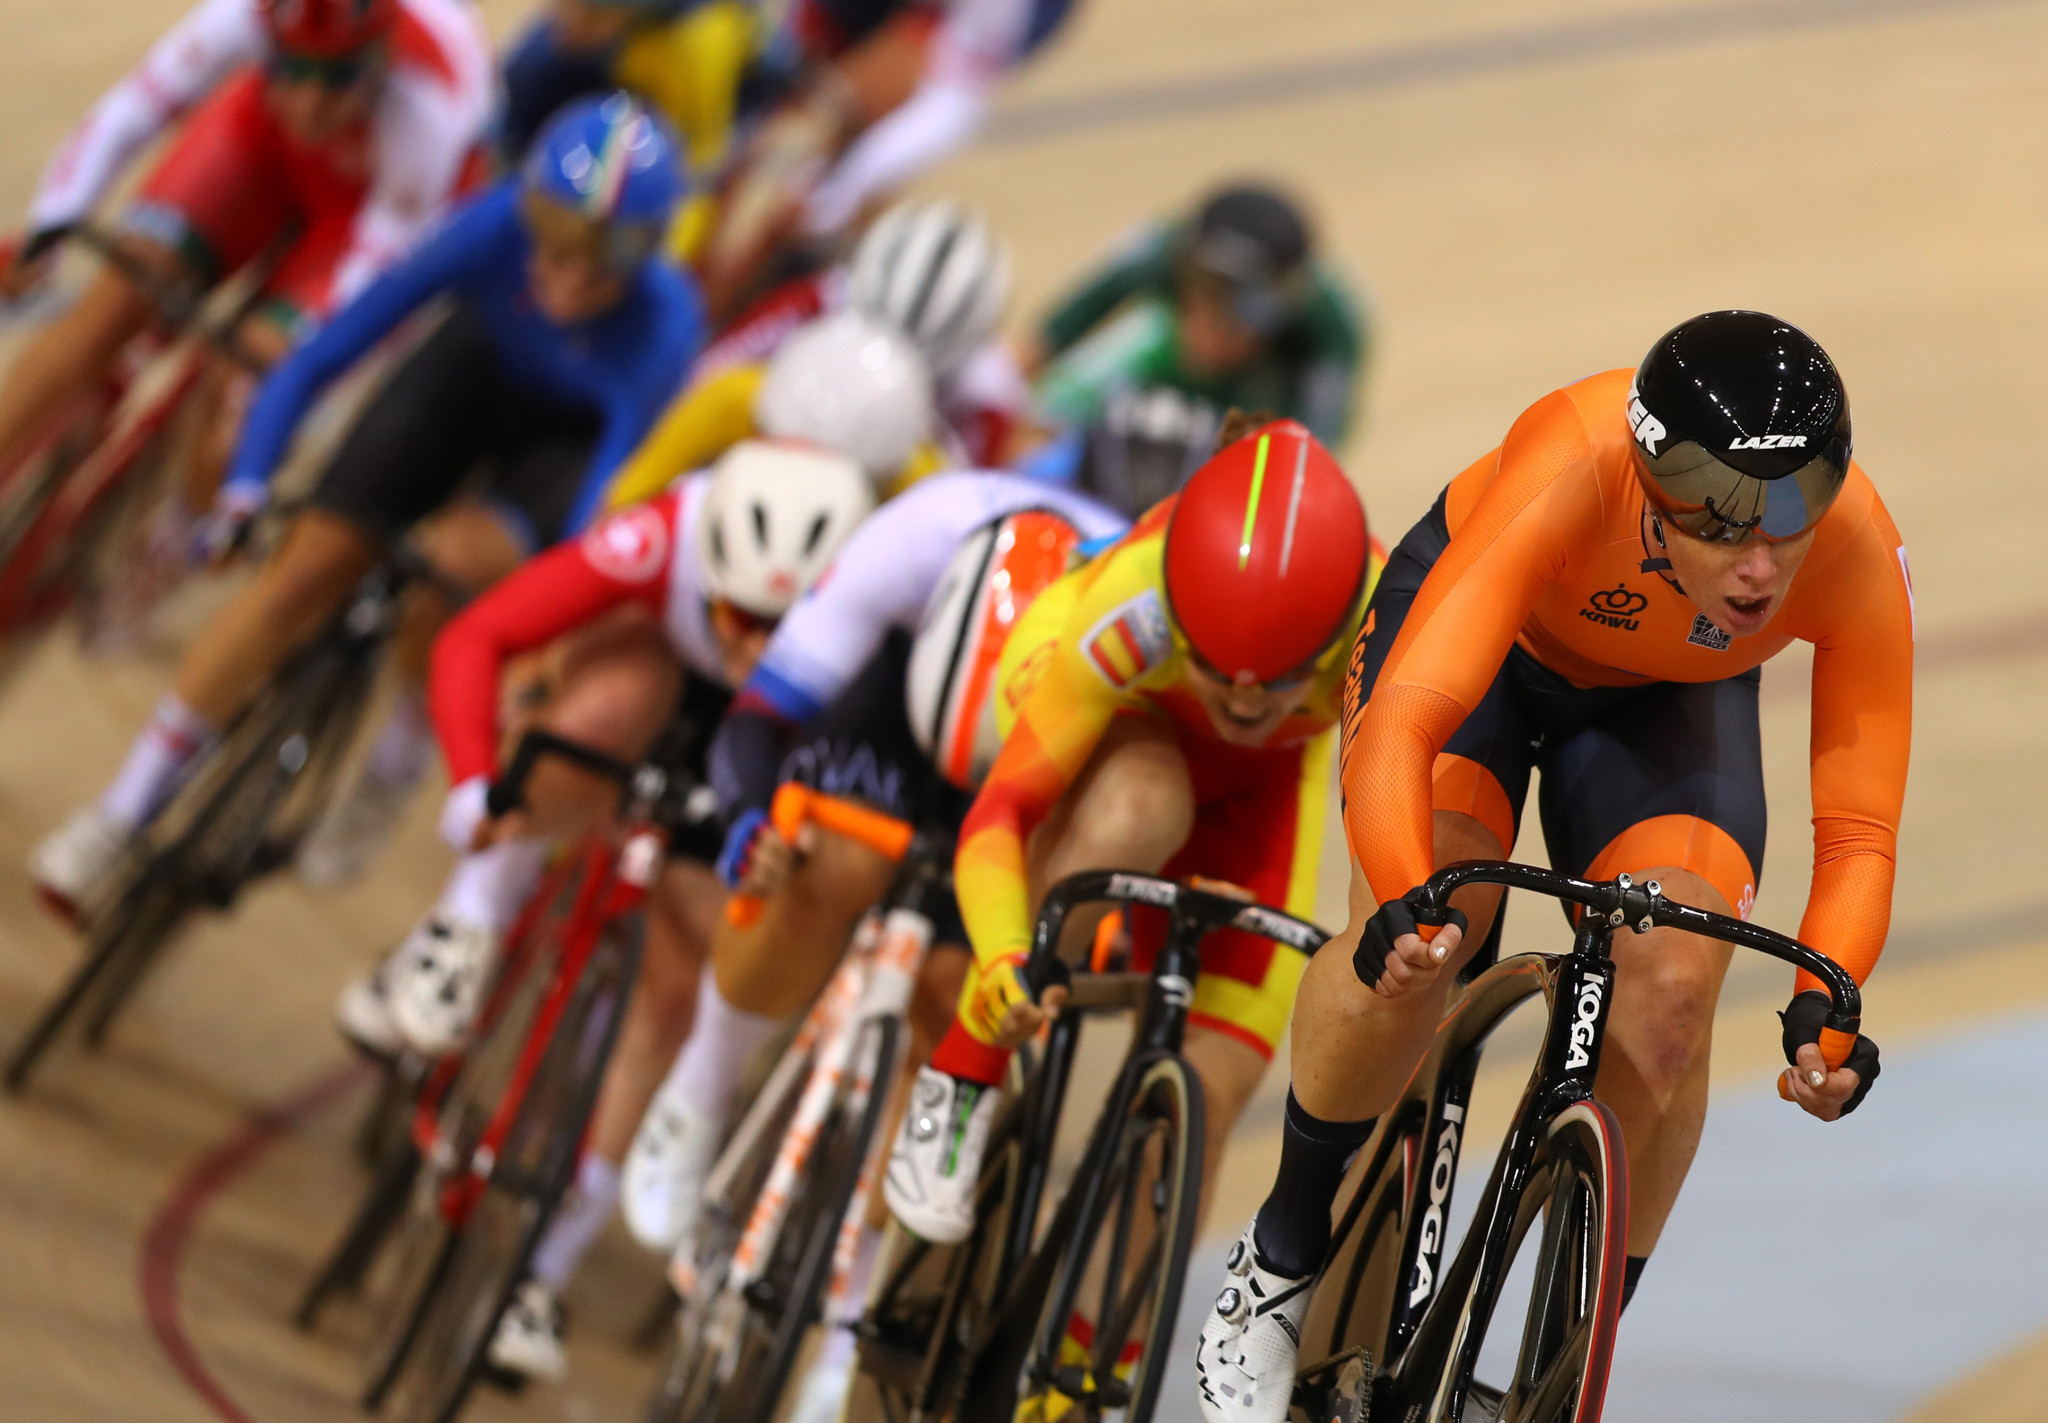 Track cycling continued at Minsk Arena ©Getty Images